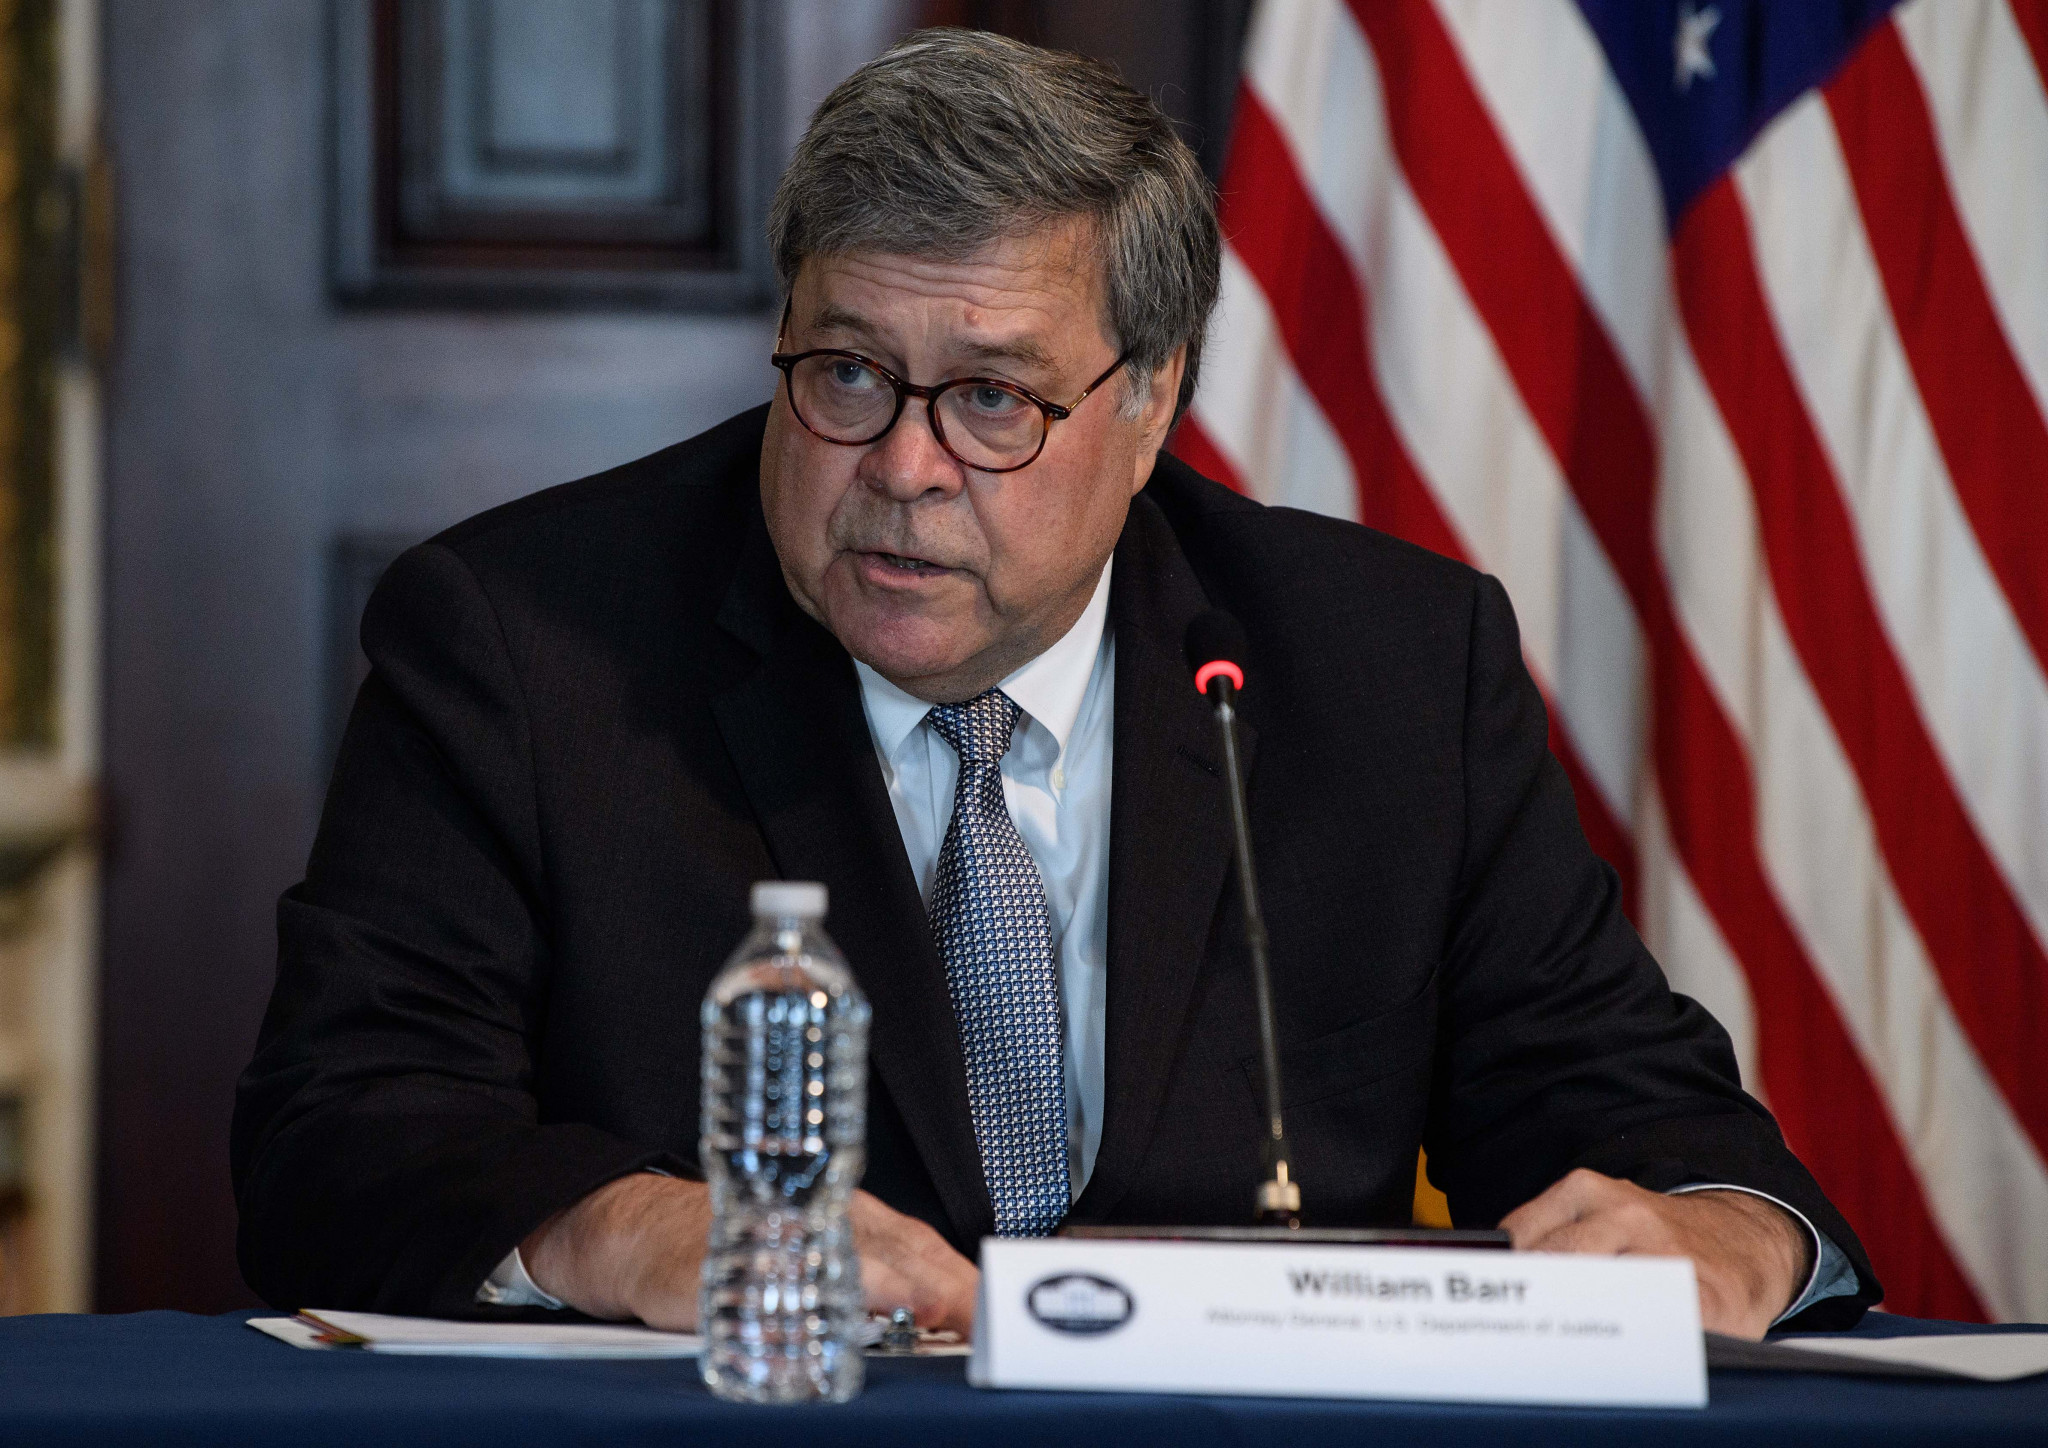 US Attorney General William Barr said the Justice Department would do "whatever’s necessary" to pursue the death penalty ©Getty Images